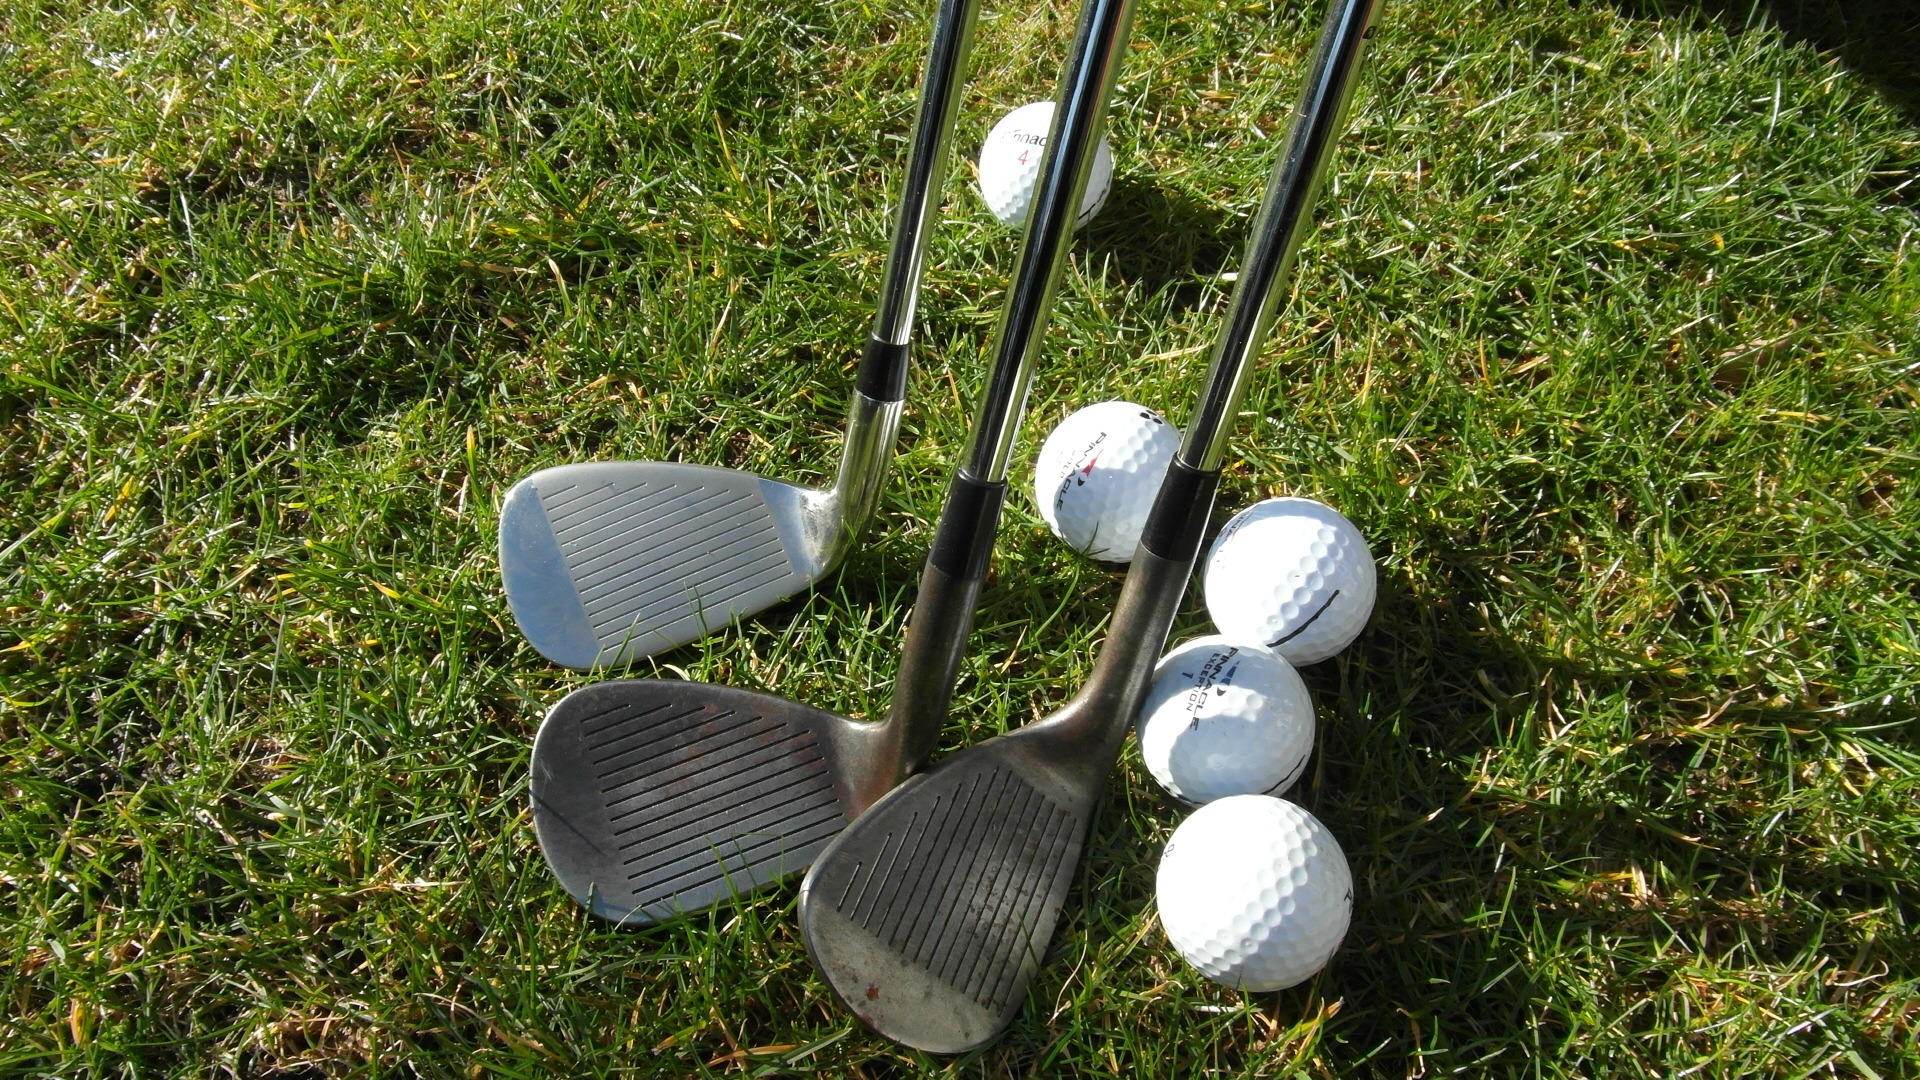 Golf iron, sand wedge, pitching wedge and gap wedge by 47ronin47